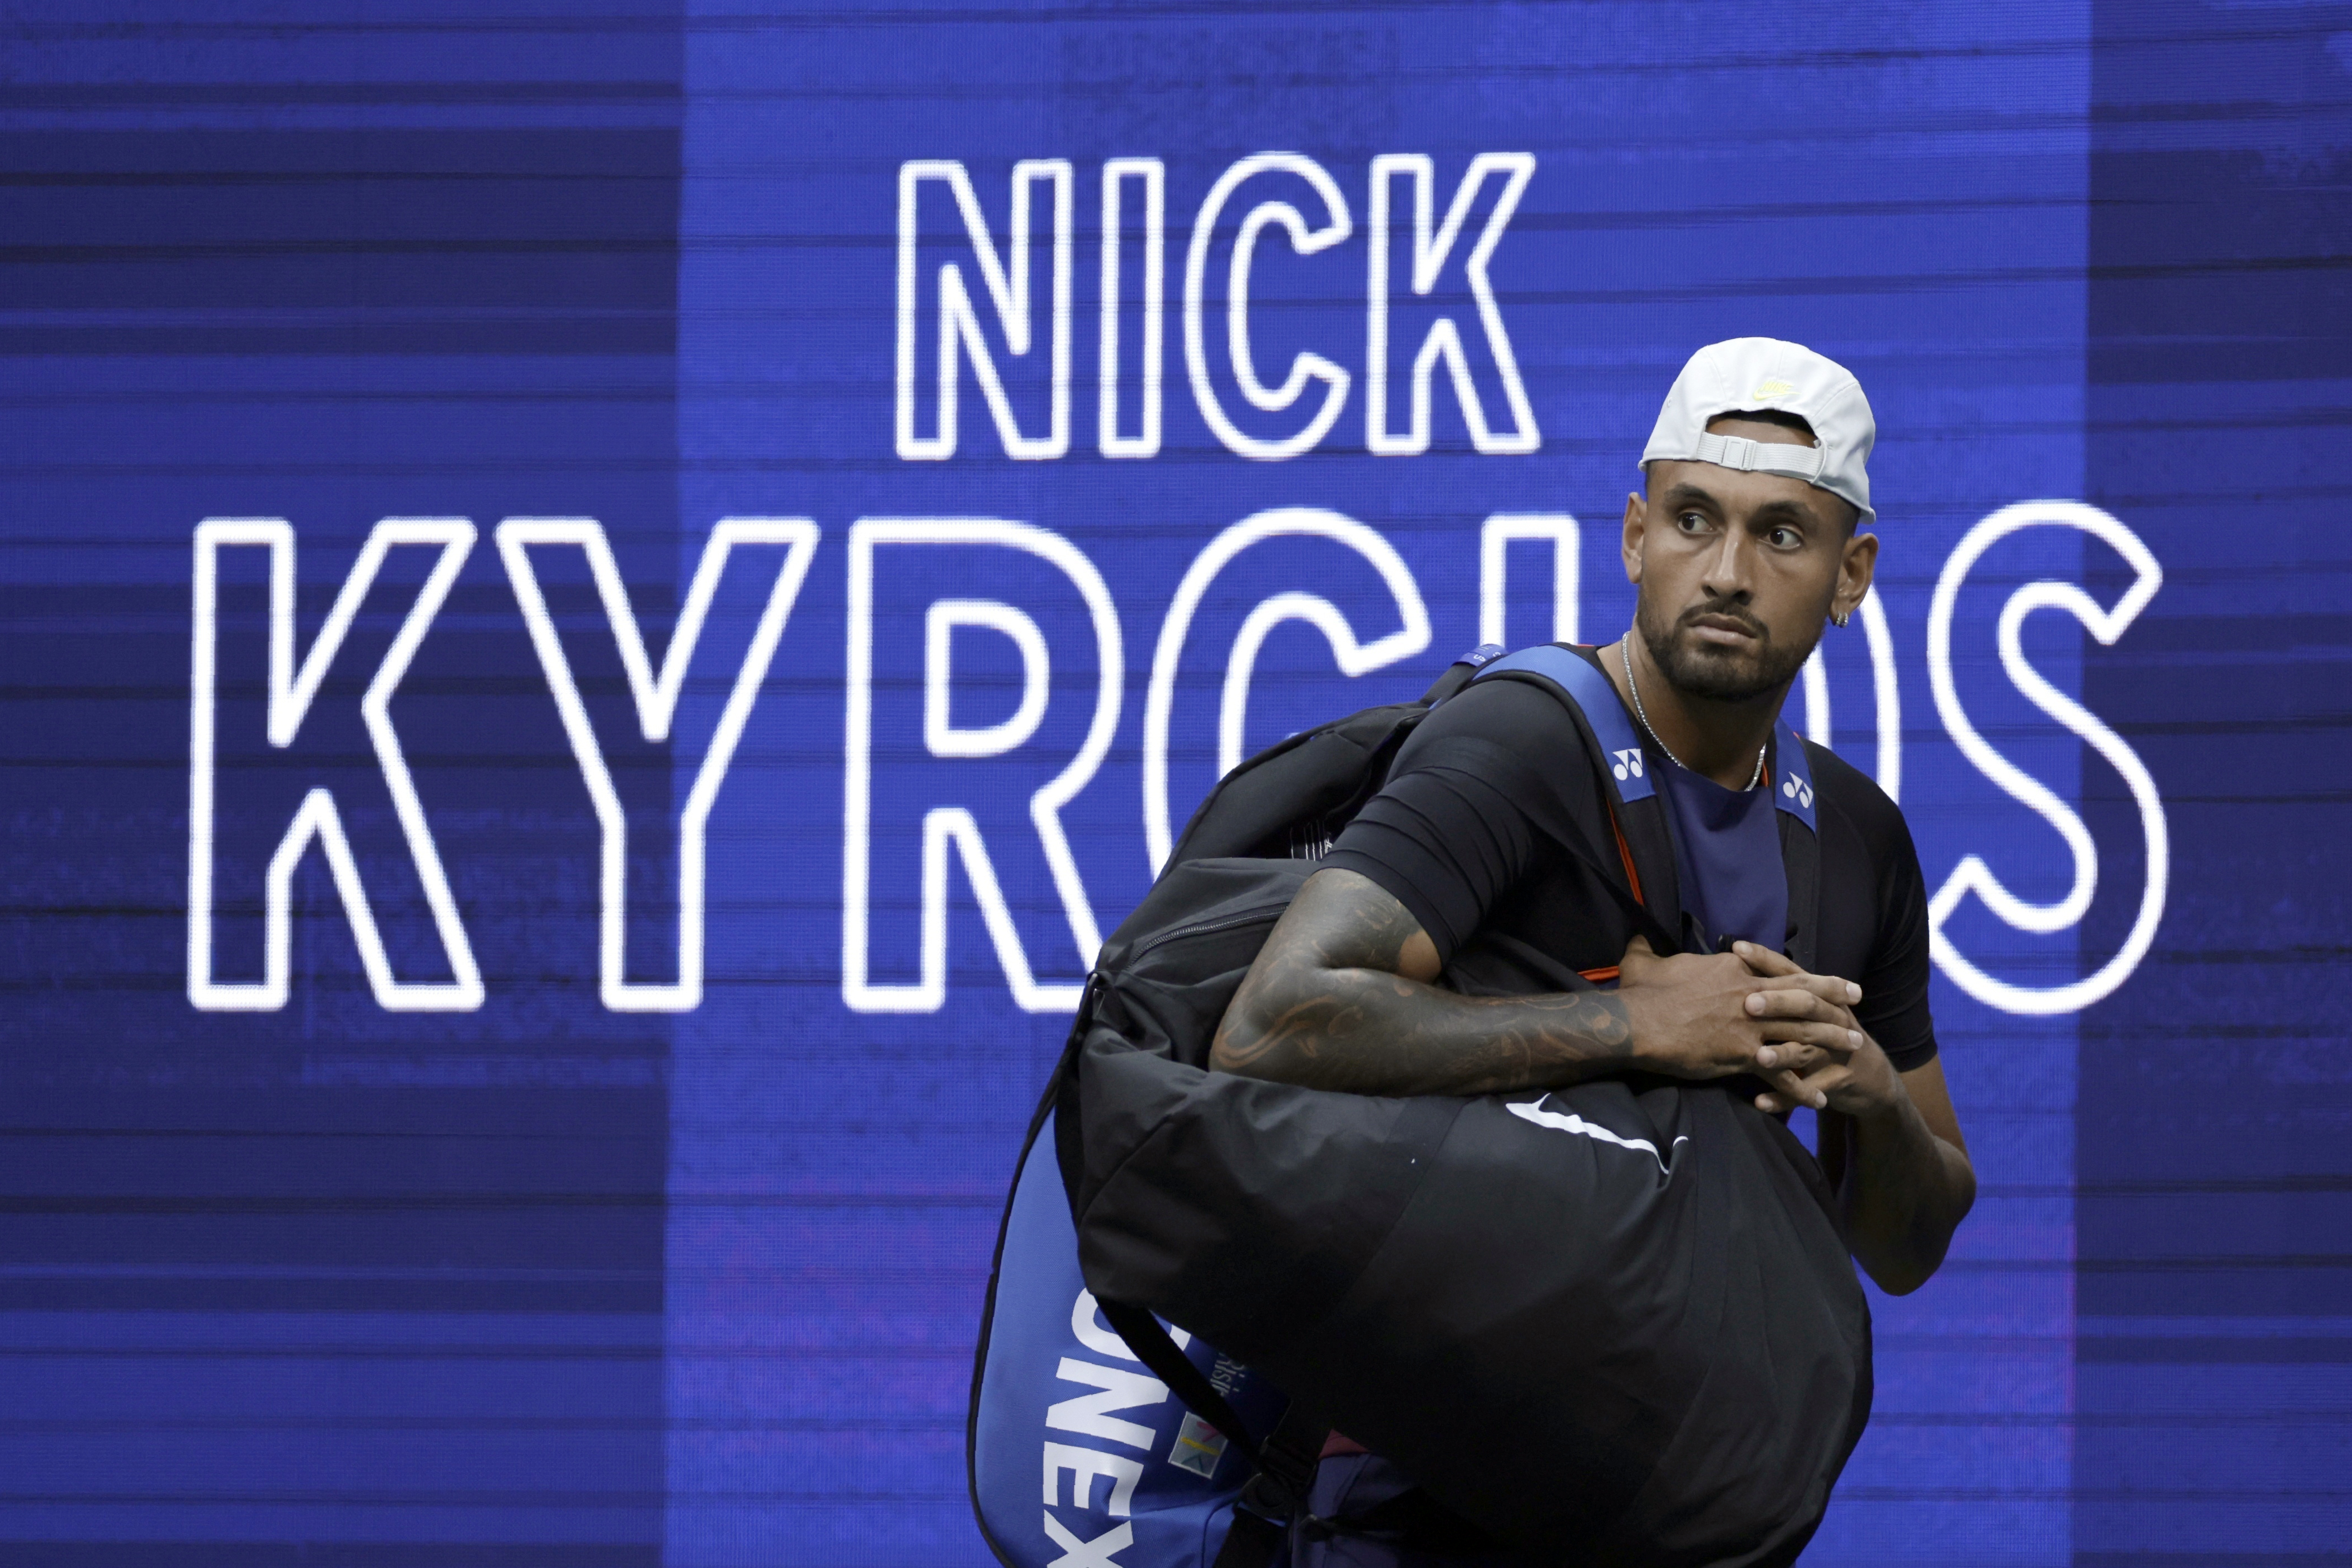 Nick Kyrgios pulled out of the US Open